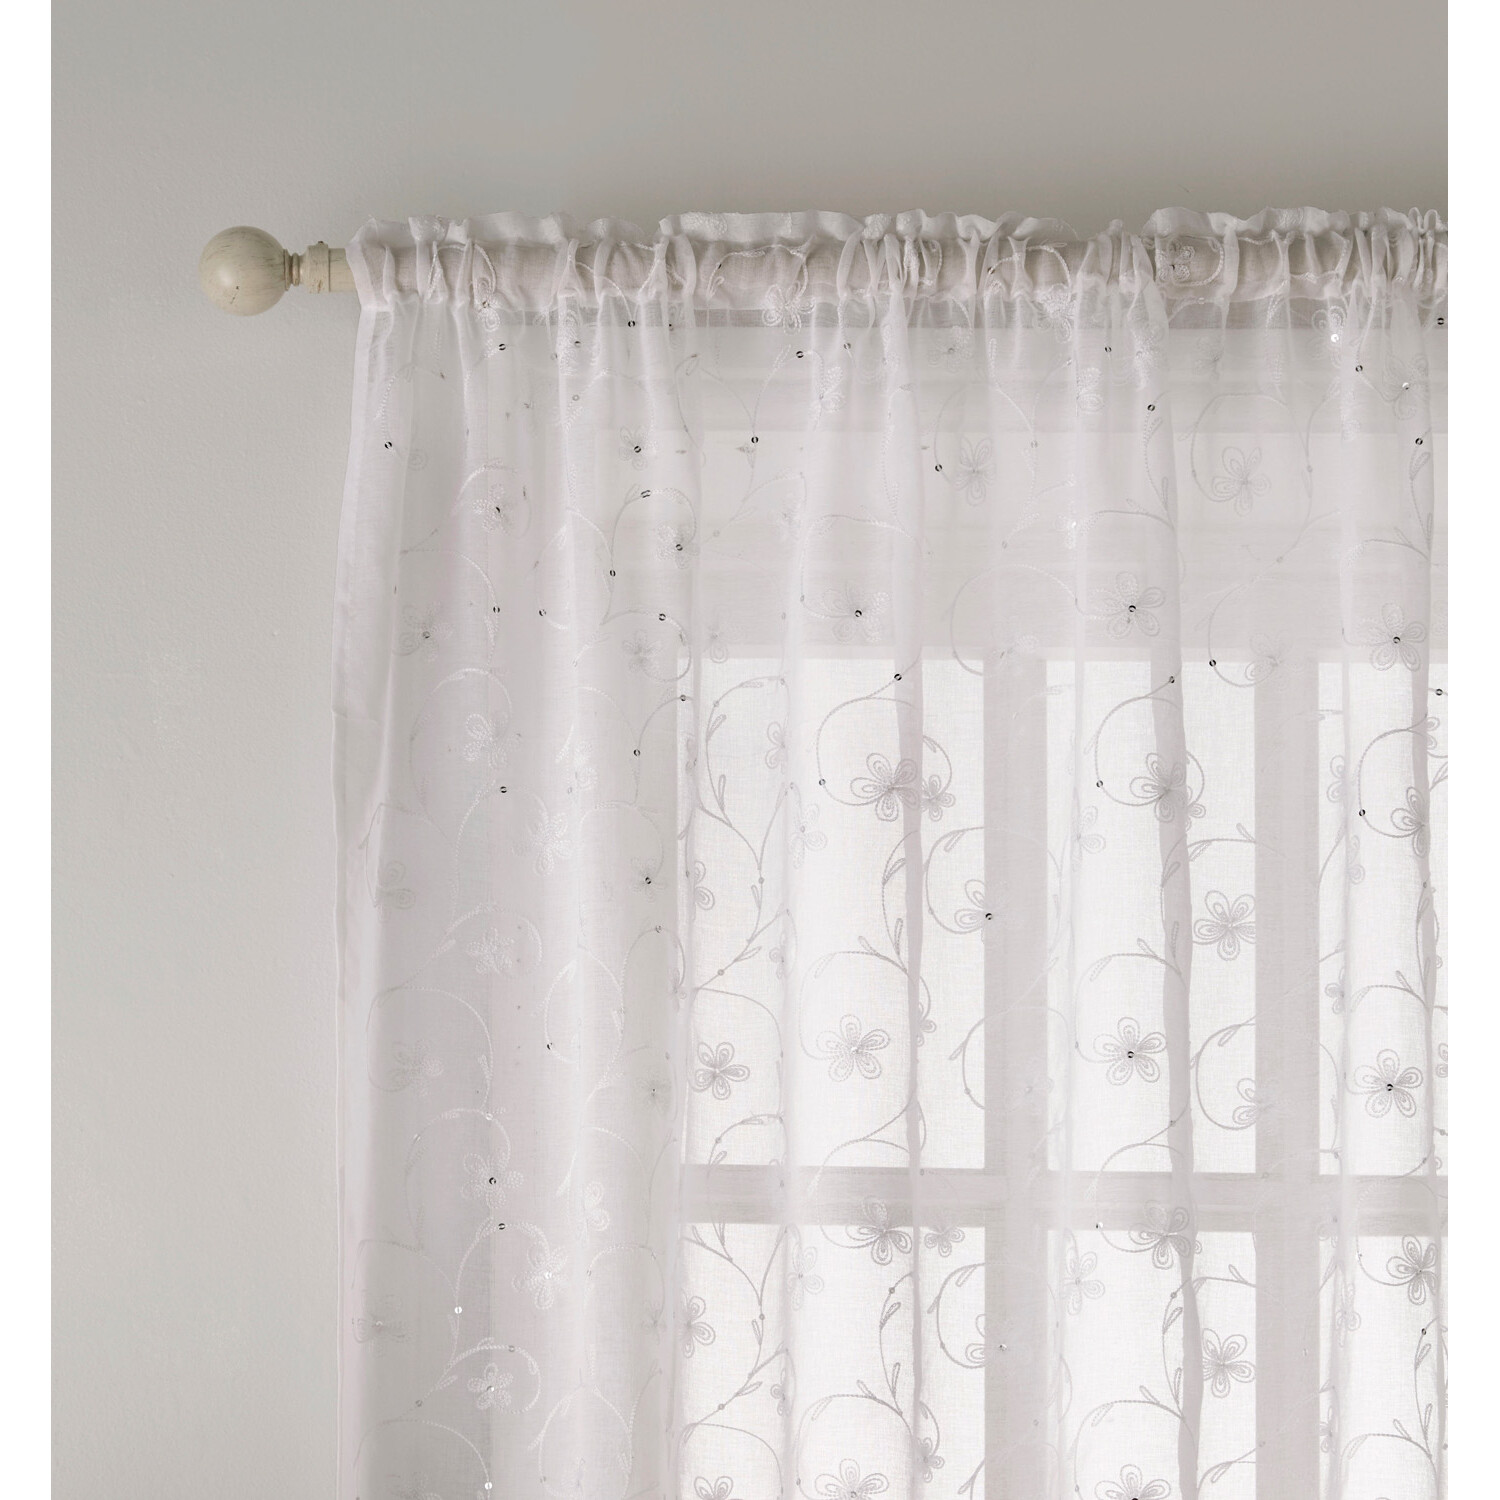 Belle White Embroidered Panel Voile Curtain 183 x 140cm Image 2